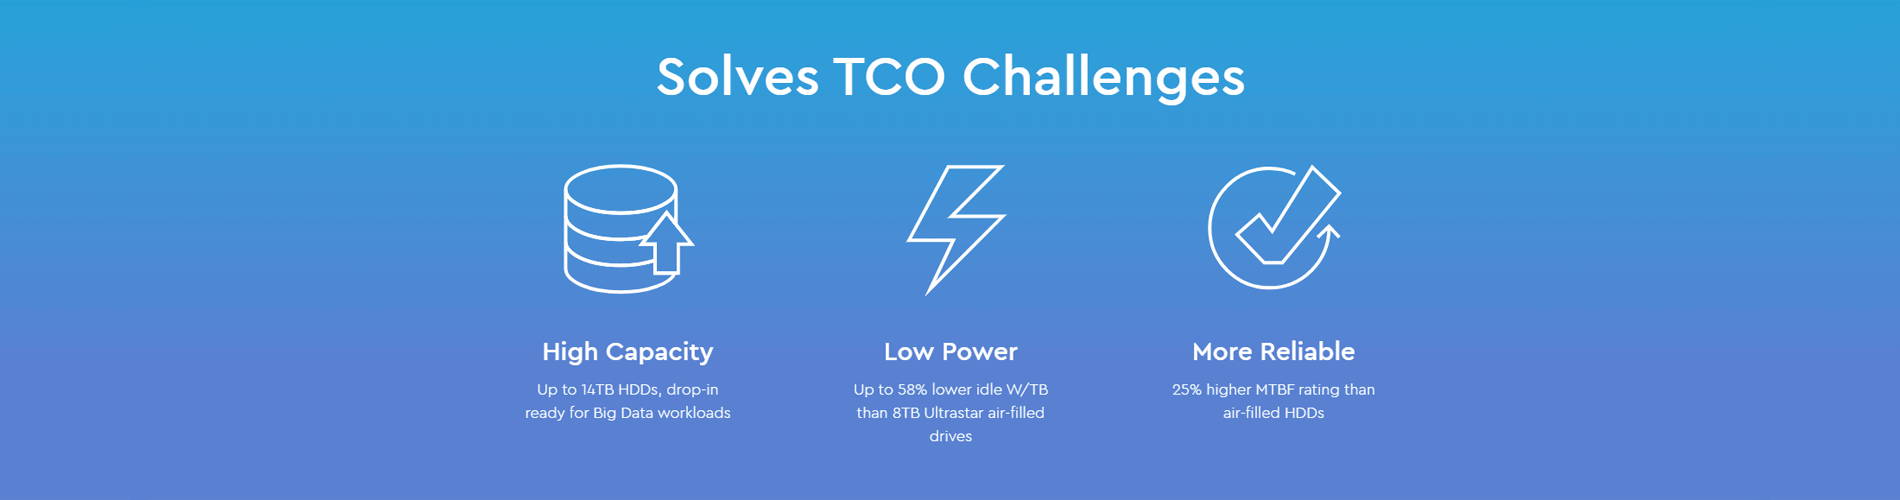 Solves TCO Challenges